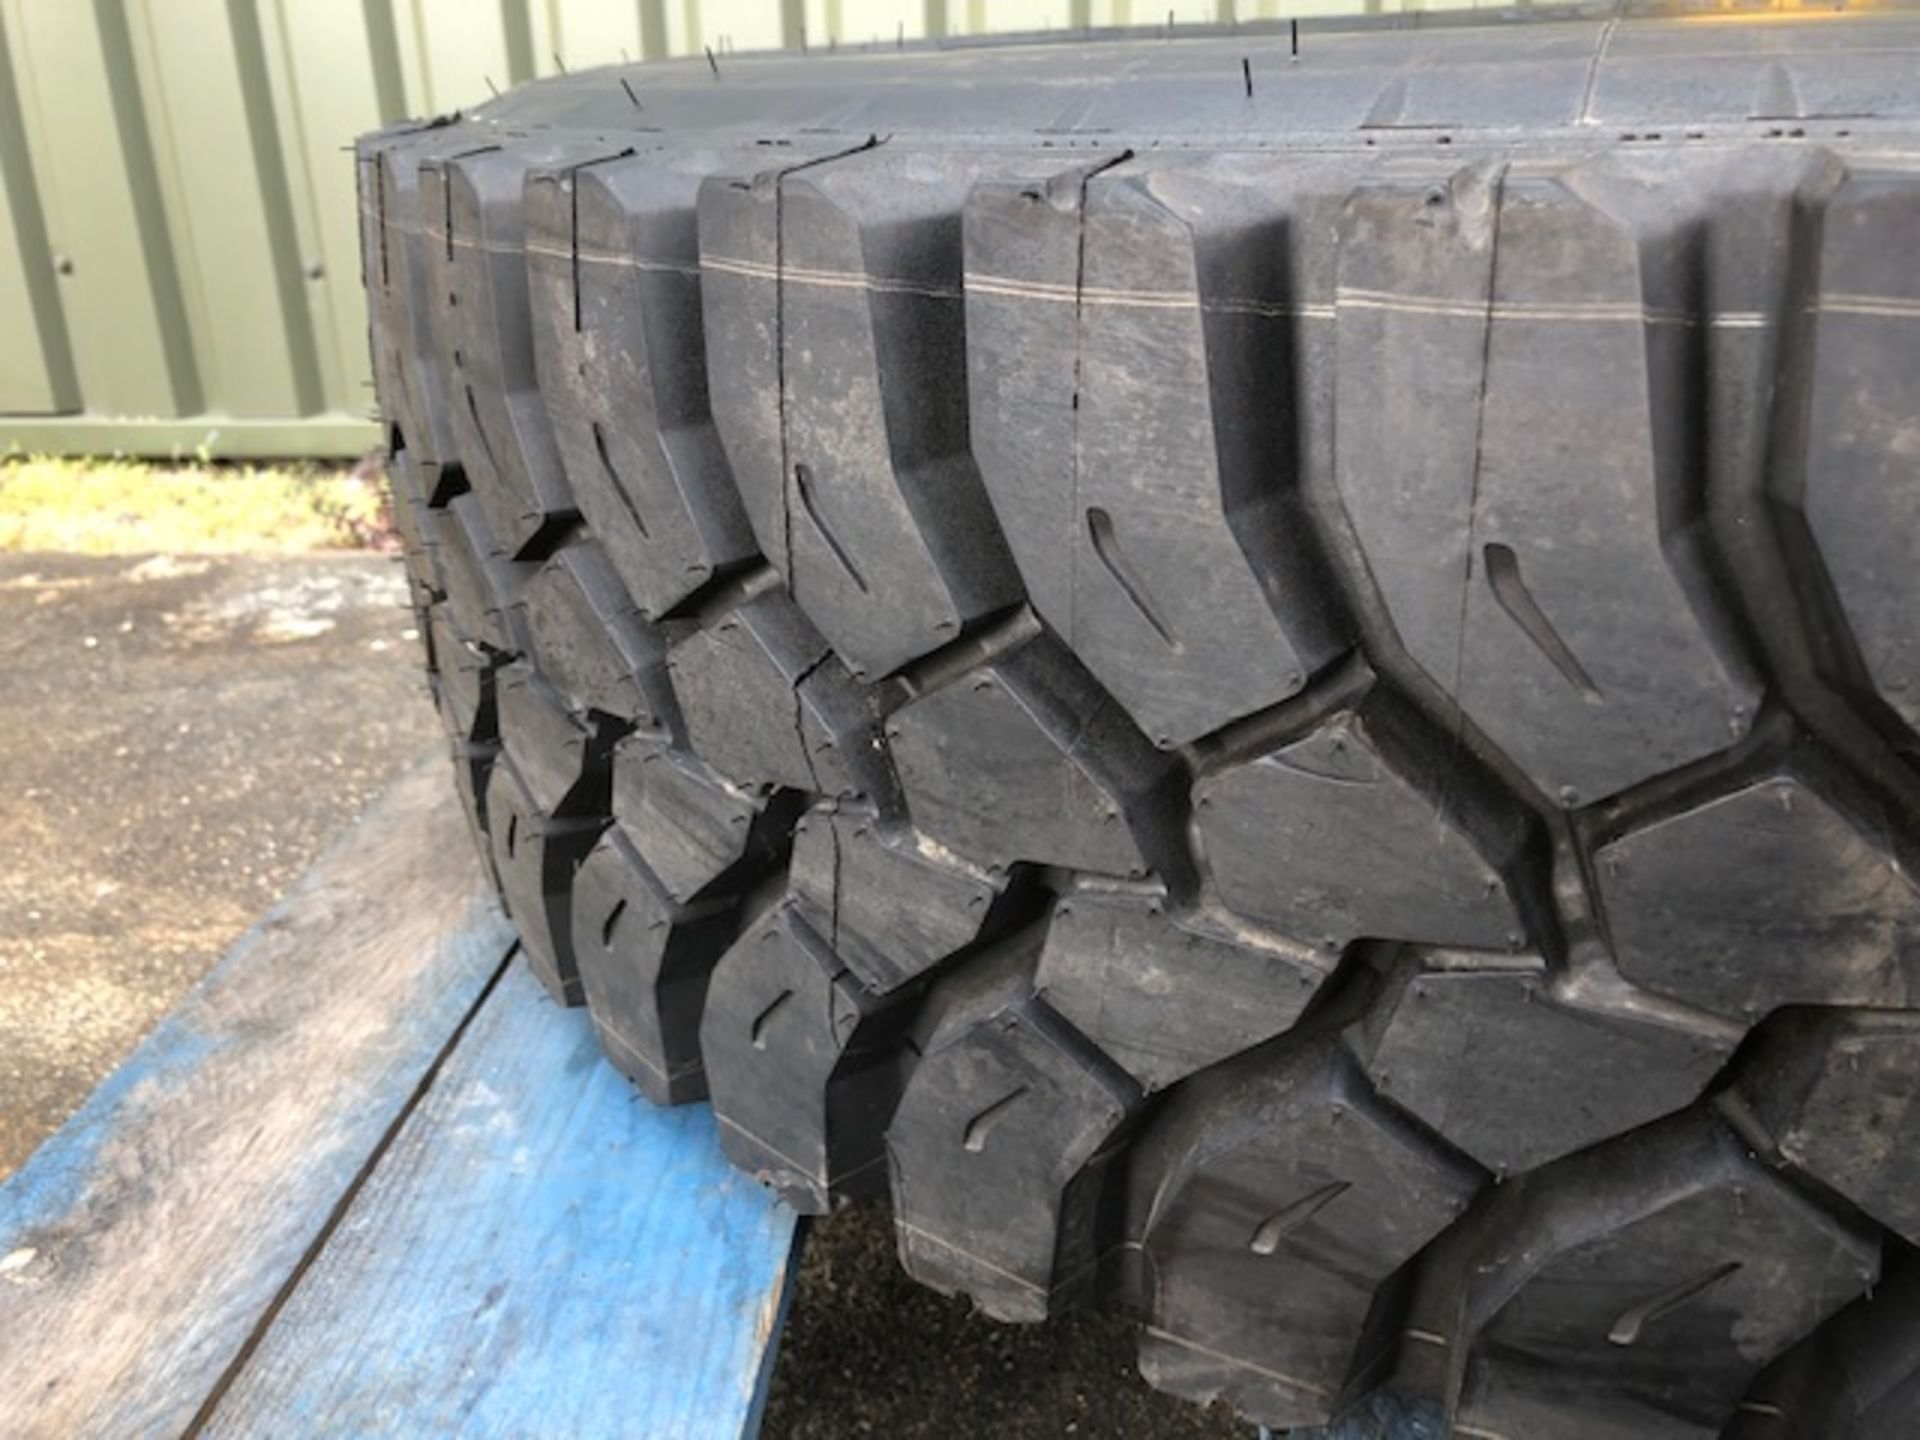 Qty 1 x Michelin XDY 315 / 80 R 22.5 XWORKS Tyre. Unused. - Image 3 of 8